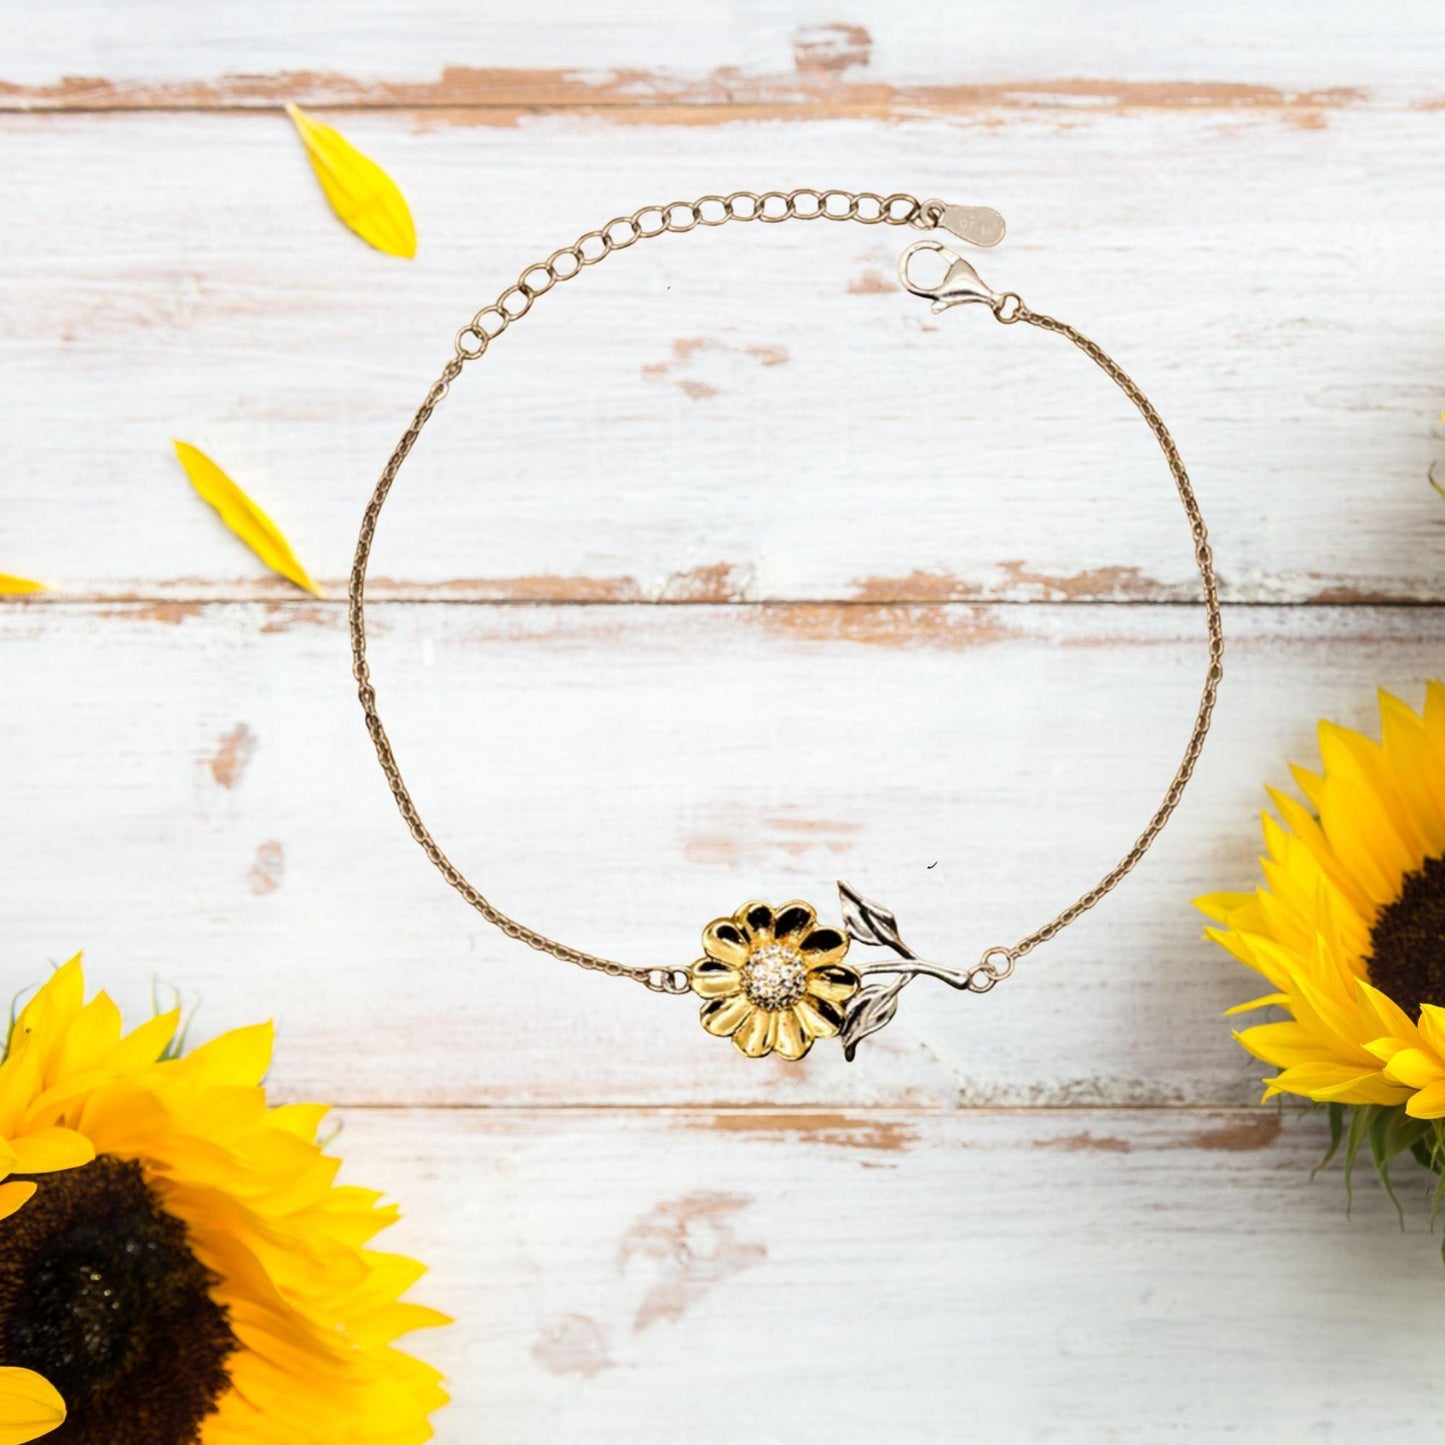 Remarkable Civil Engineer Gifts, Your dedication and hard work, Inspirational Birthday Christmas Unique Sunflower Bracelet For Civil Engineer, Coworkers, Men, Women, Friends - Mallard Moon Gift Shop